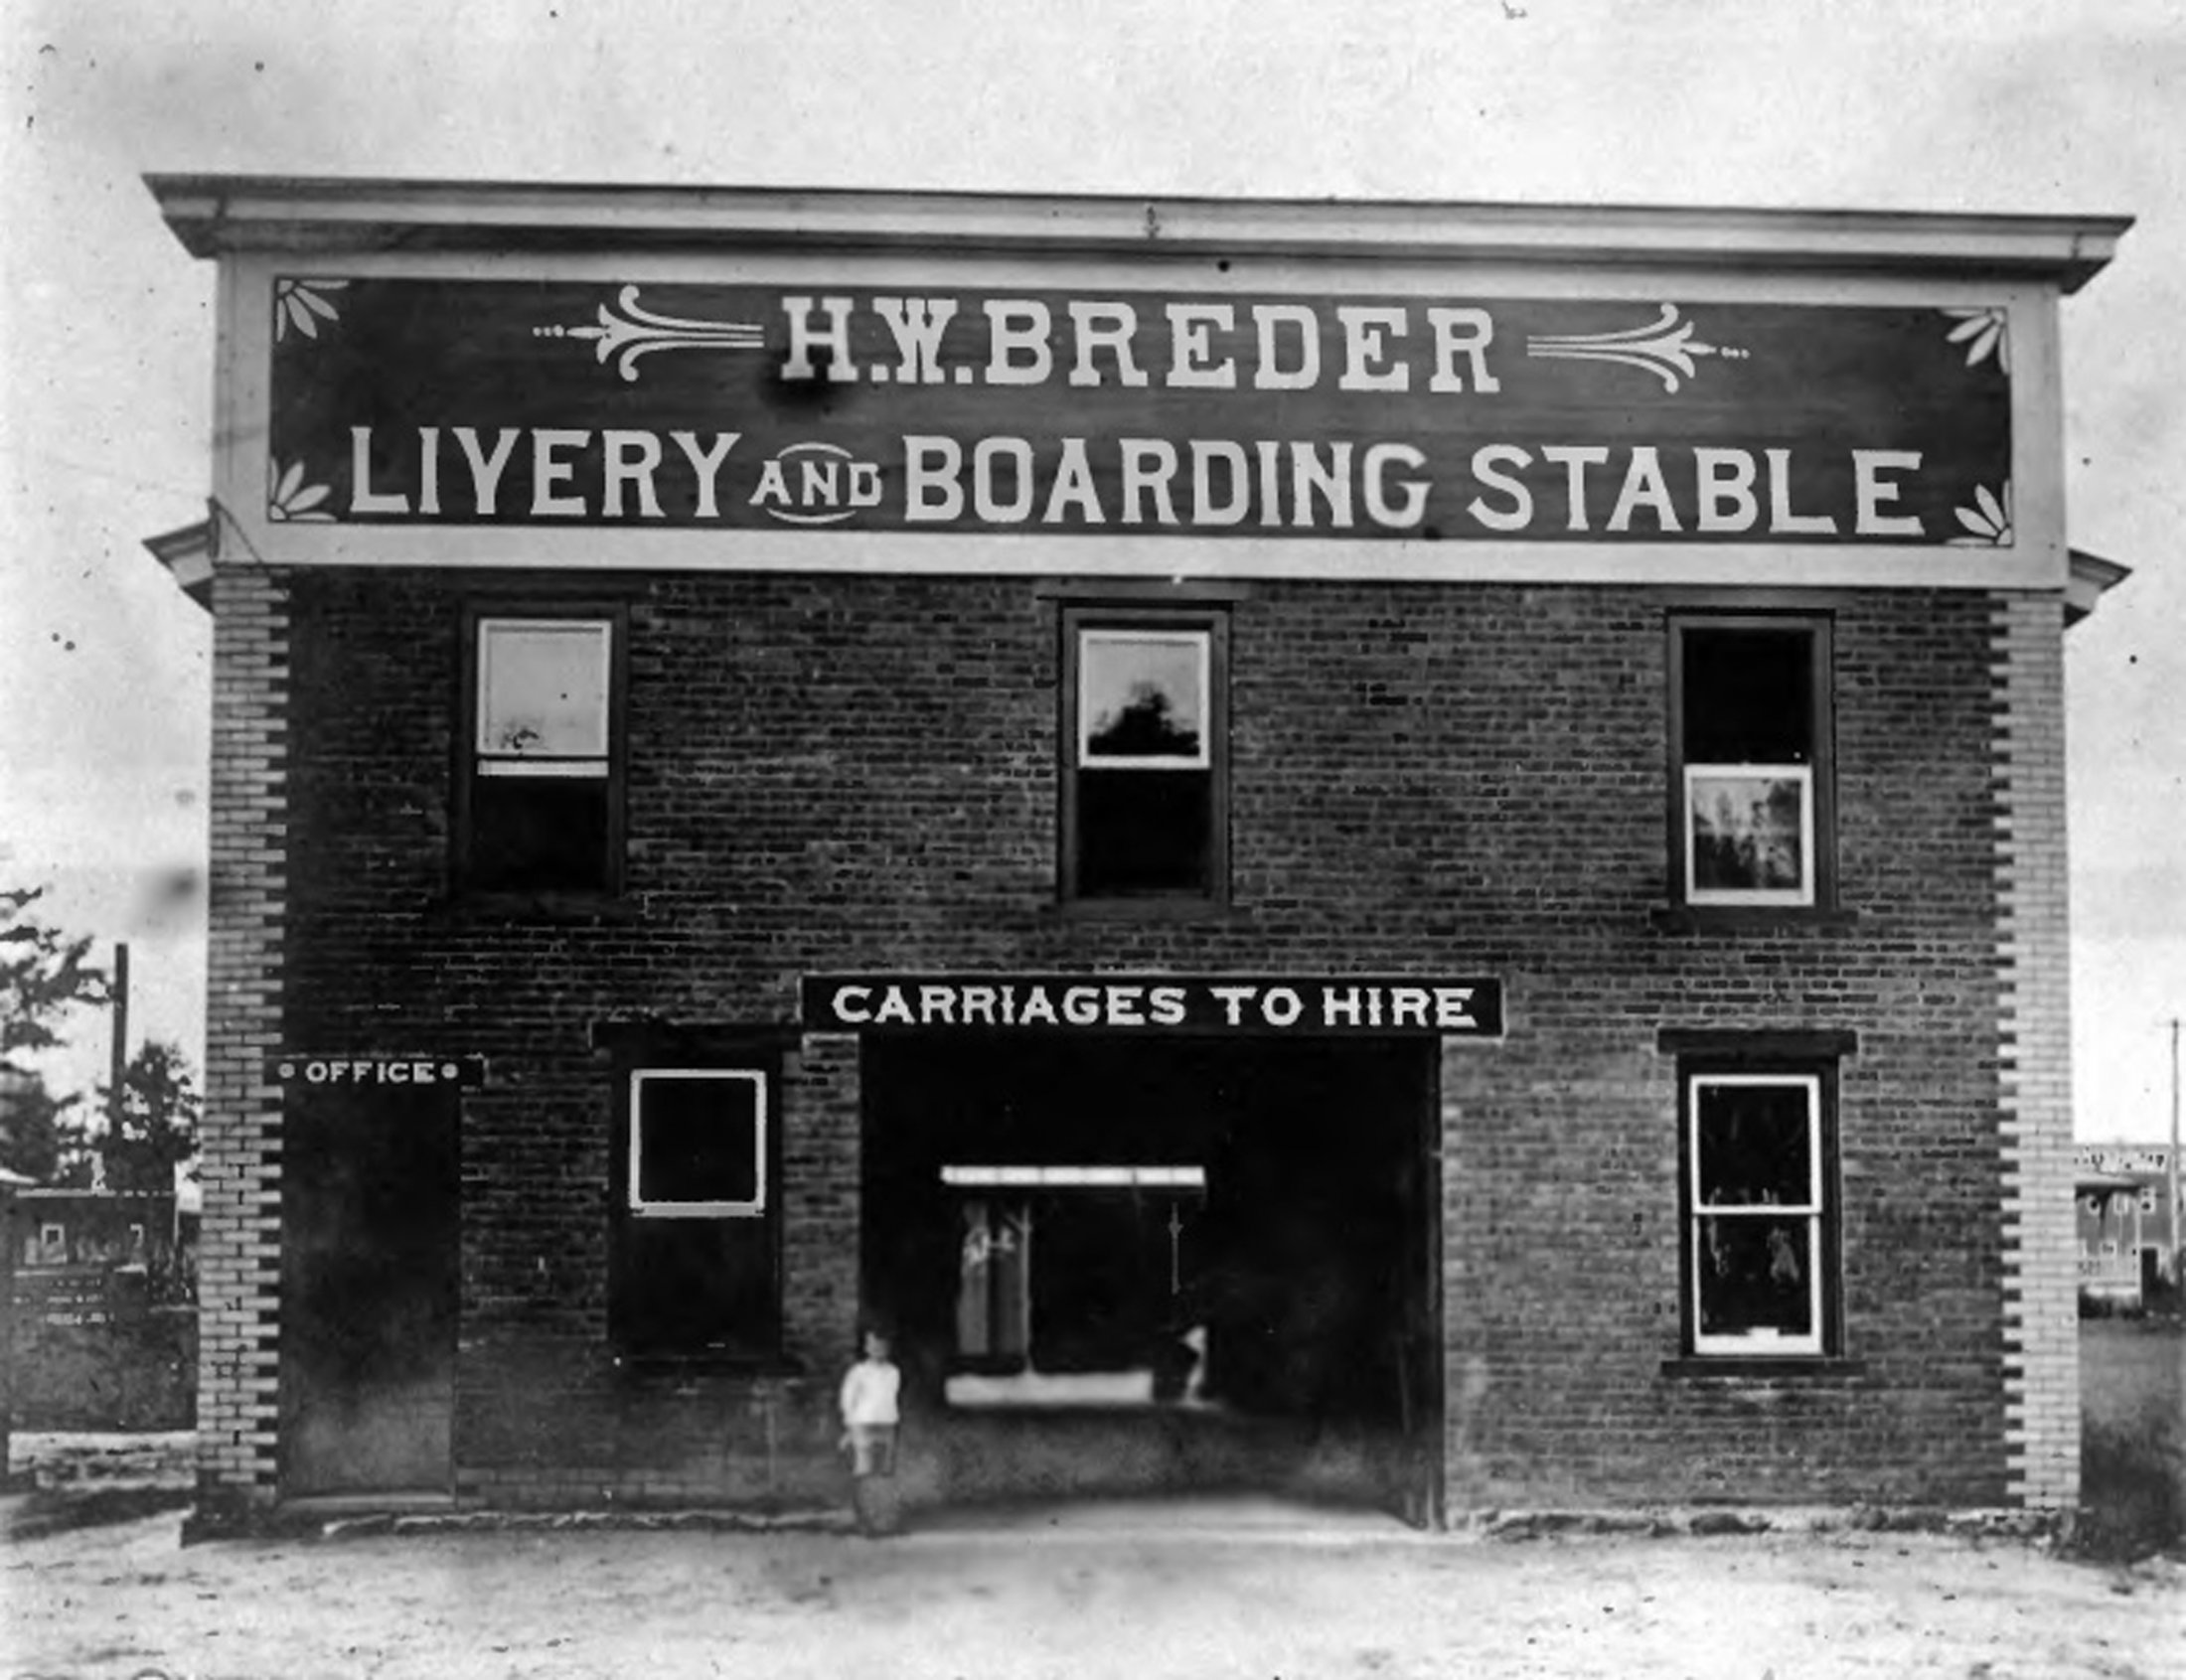 Egg Harbor City - H W Breder Livery andBoarding Stable - c 1900